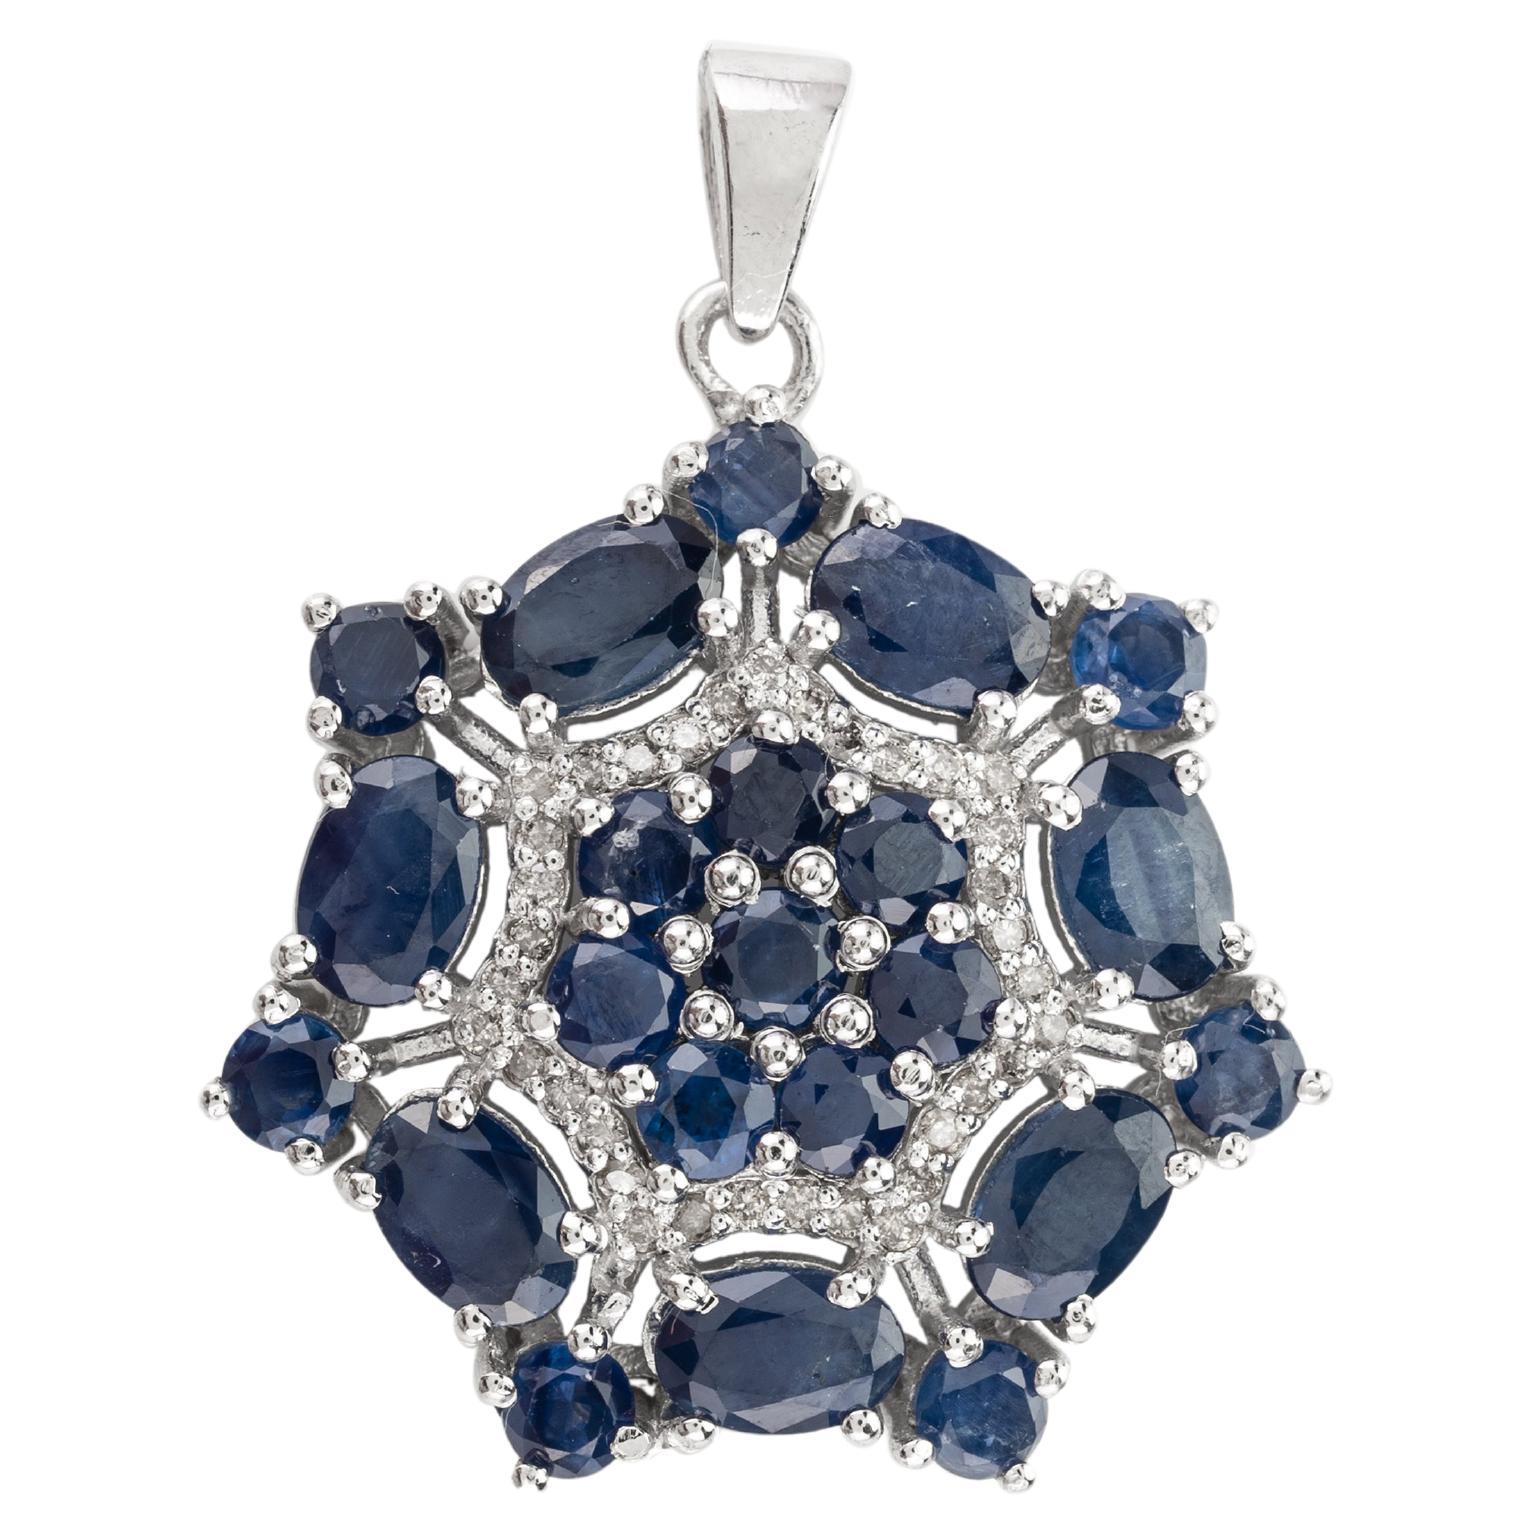 7.15 Cts Natural Blue Sapphire Cluster Flower Pendant in .925 Sterling Silver